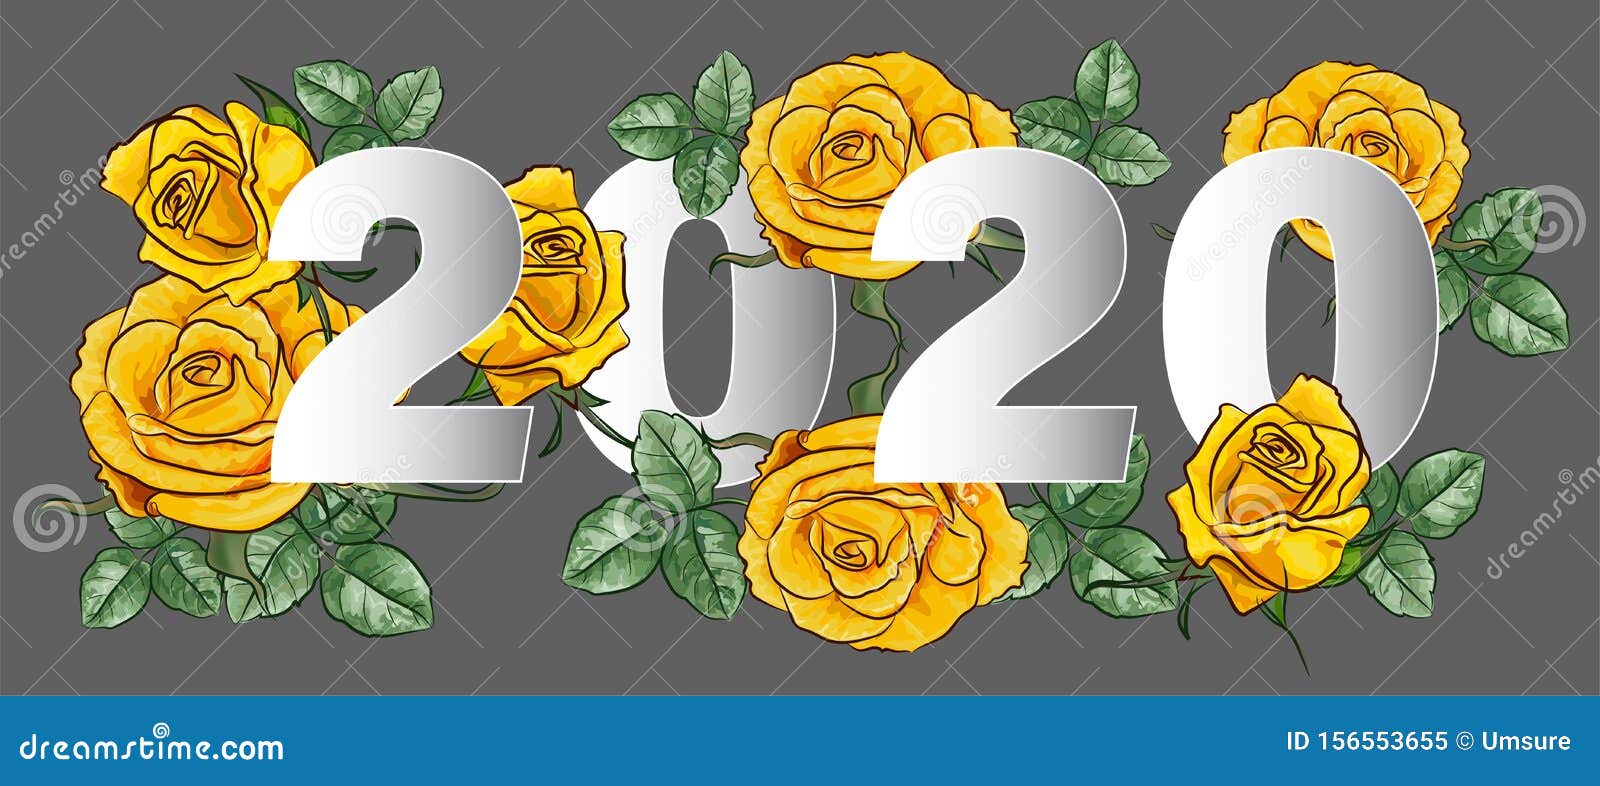 Happy New Year with 2020 Paper Cut with Yellow Roses Stock Vector ...